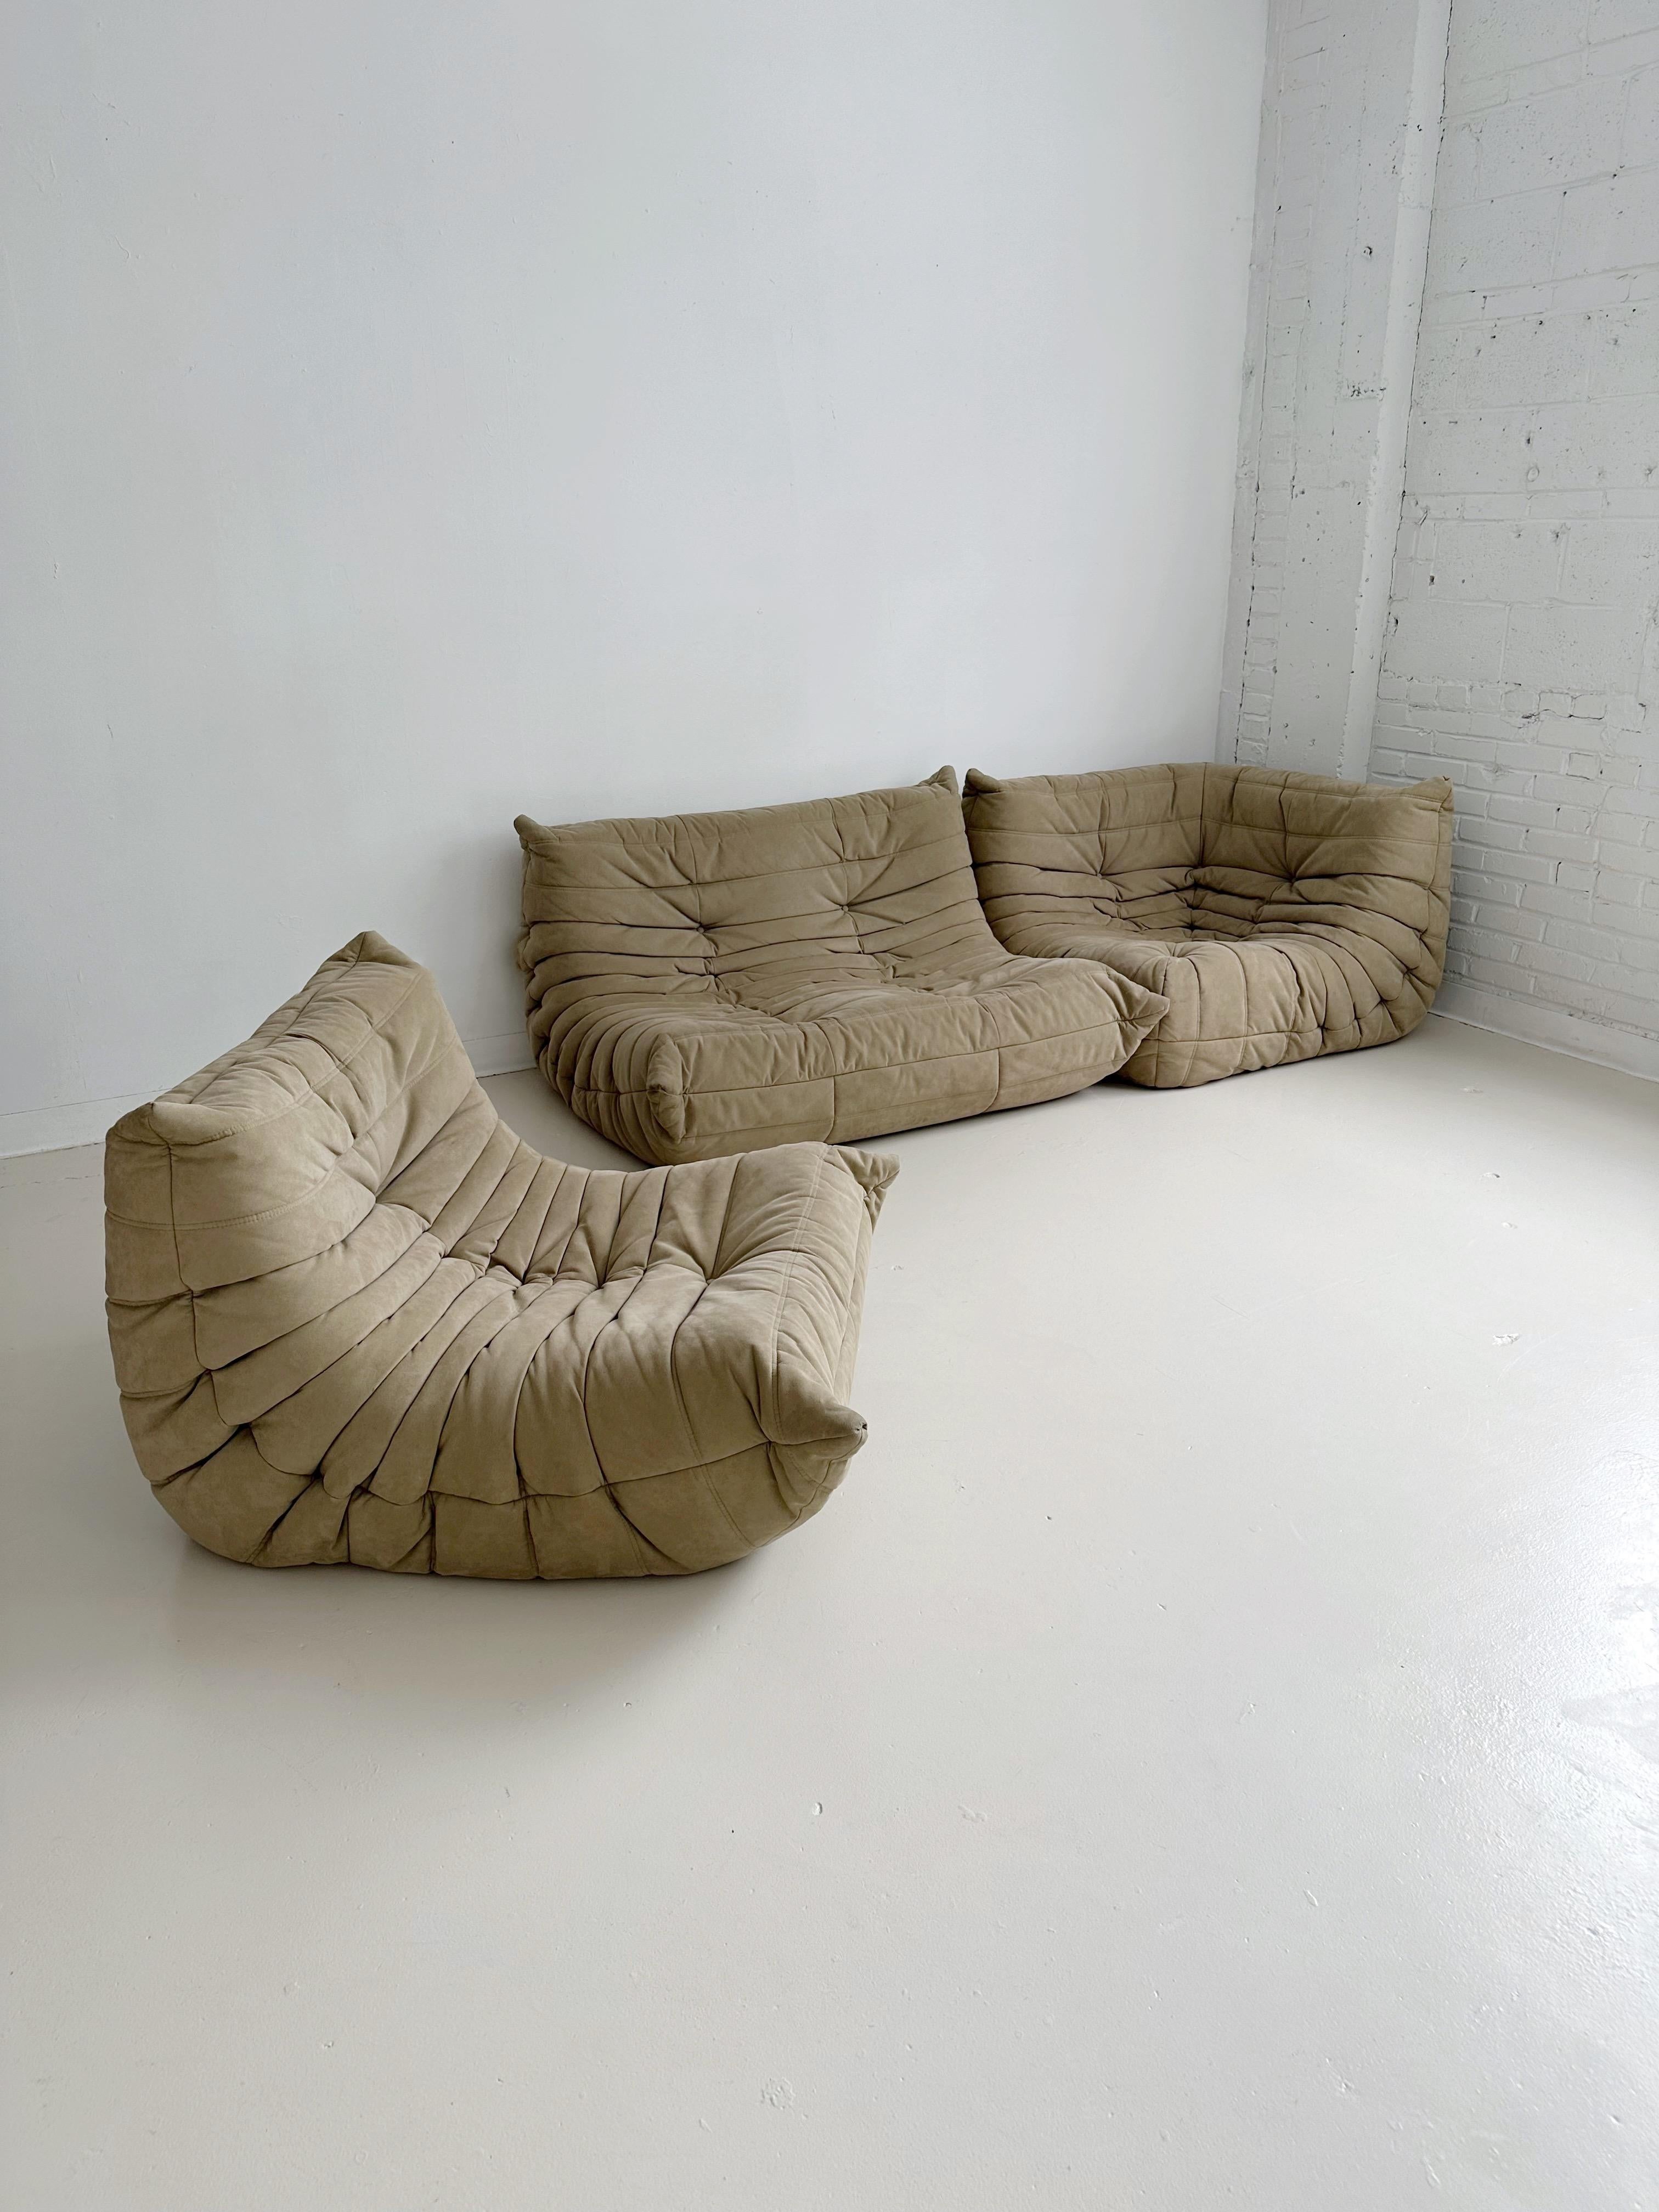 Sand Alcantara Togo sofa set by Michel Ducaroy for Ligne Roset

The set consists of one two seater, one corner and one single seat Togo.

Alcantara is the benchmark high-end microfibre brand that Ligne Roset uses, easy to clean and extremely